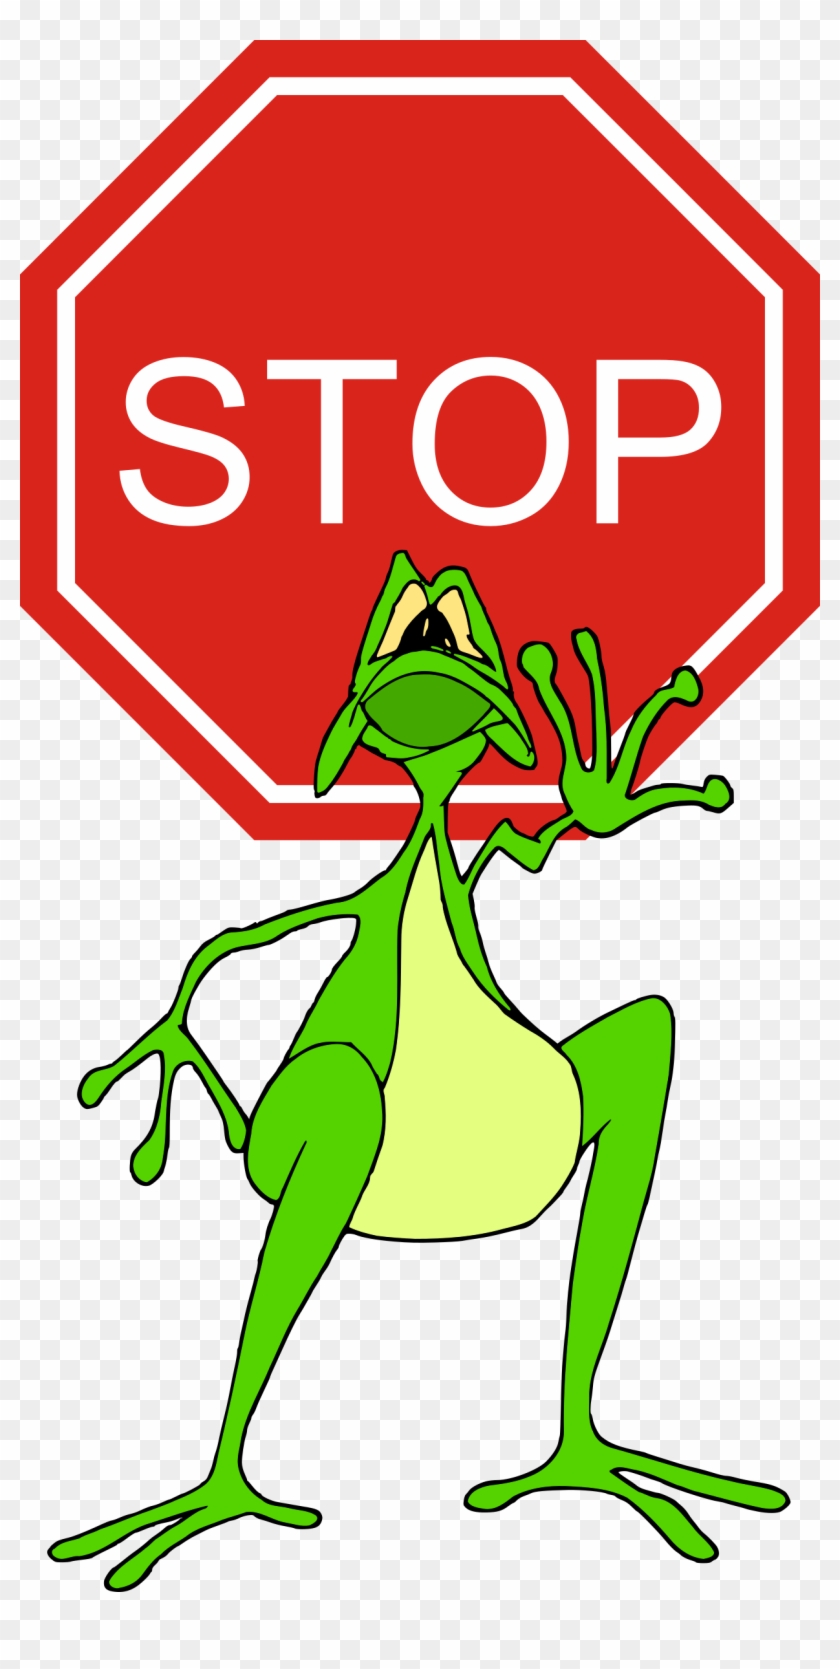 This Free Icons Png Design Of Stop Sign And Frog Clipart #584918